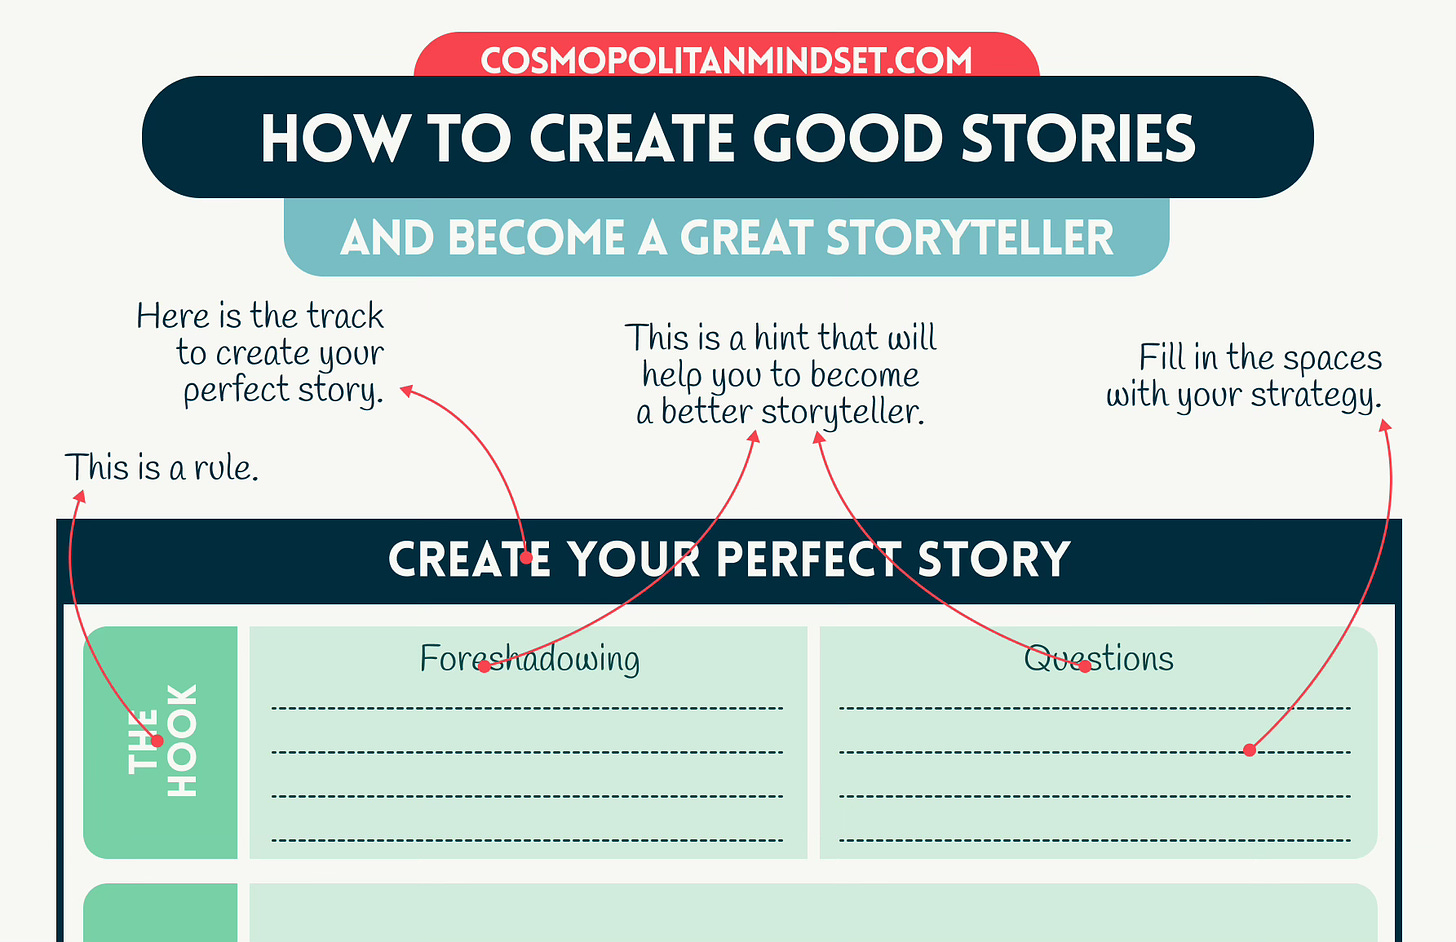 Instructions for How To Create Good Stories and Become a Great Storyteller